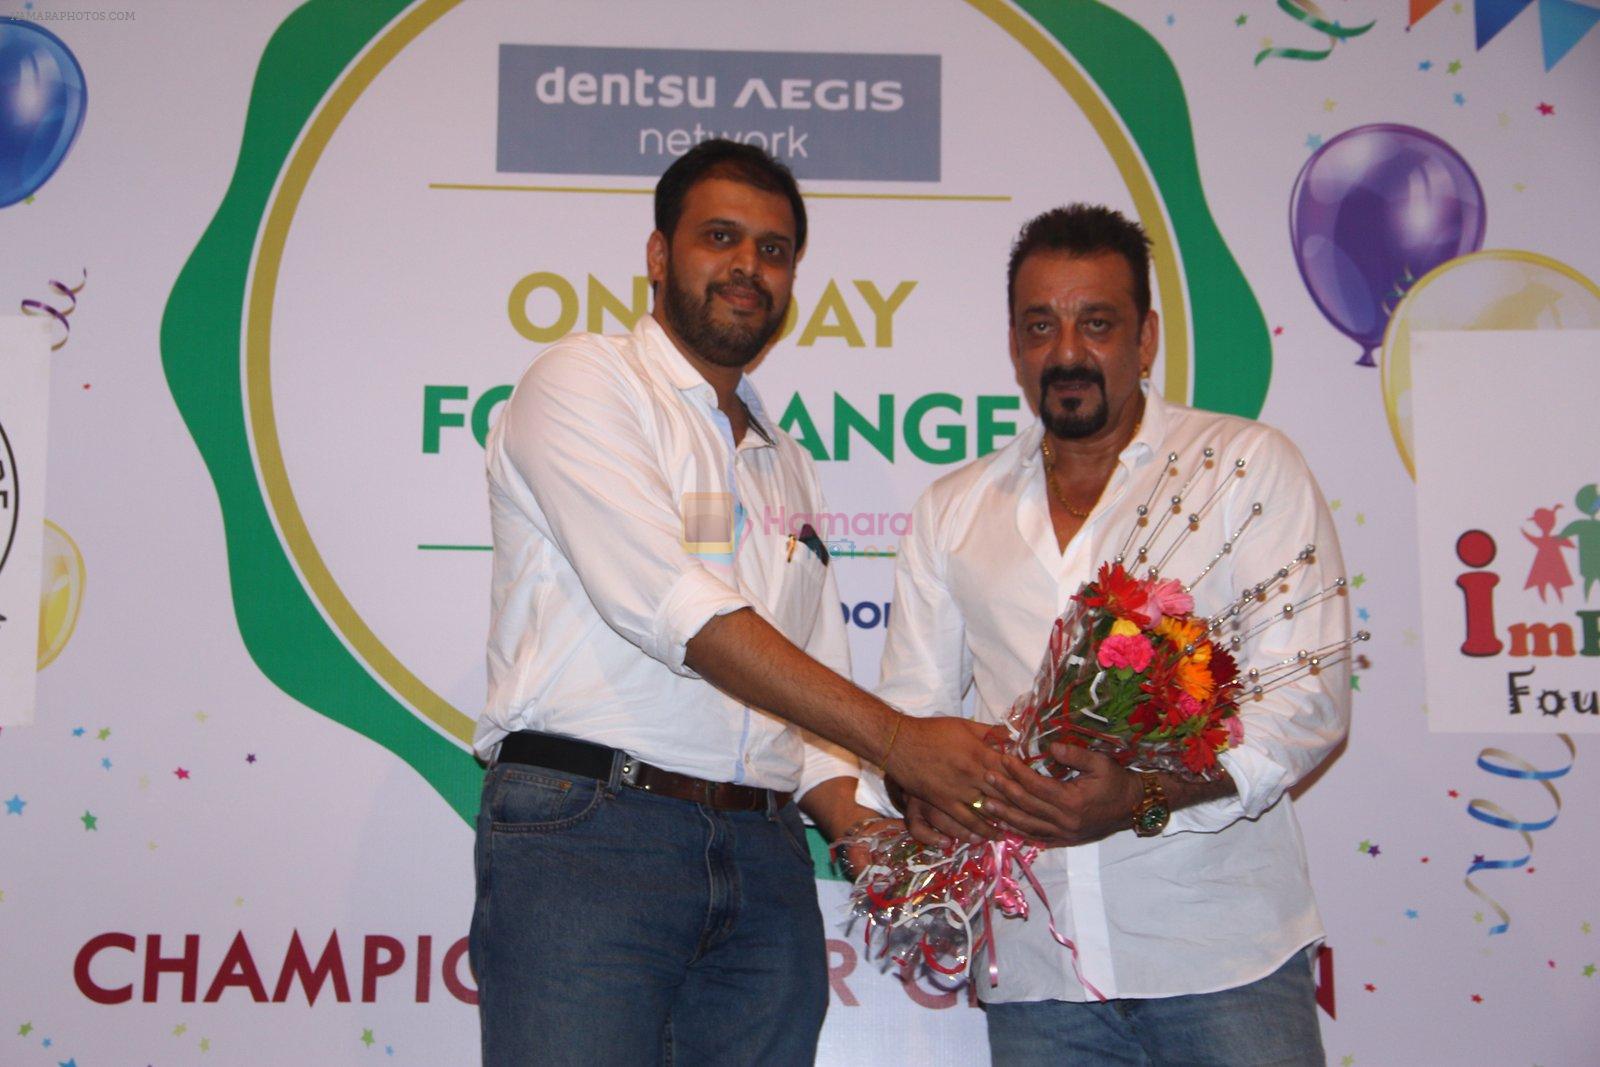 Sanjay Dutt at Tata Memorial hospital for kids hosted by Dentsu Aegis Network on 3rd June 2016